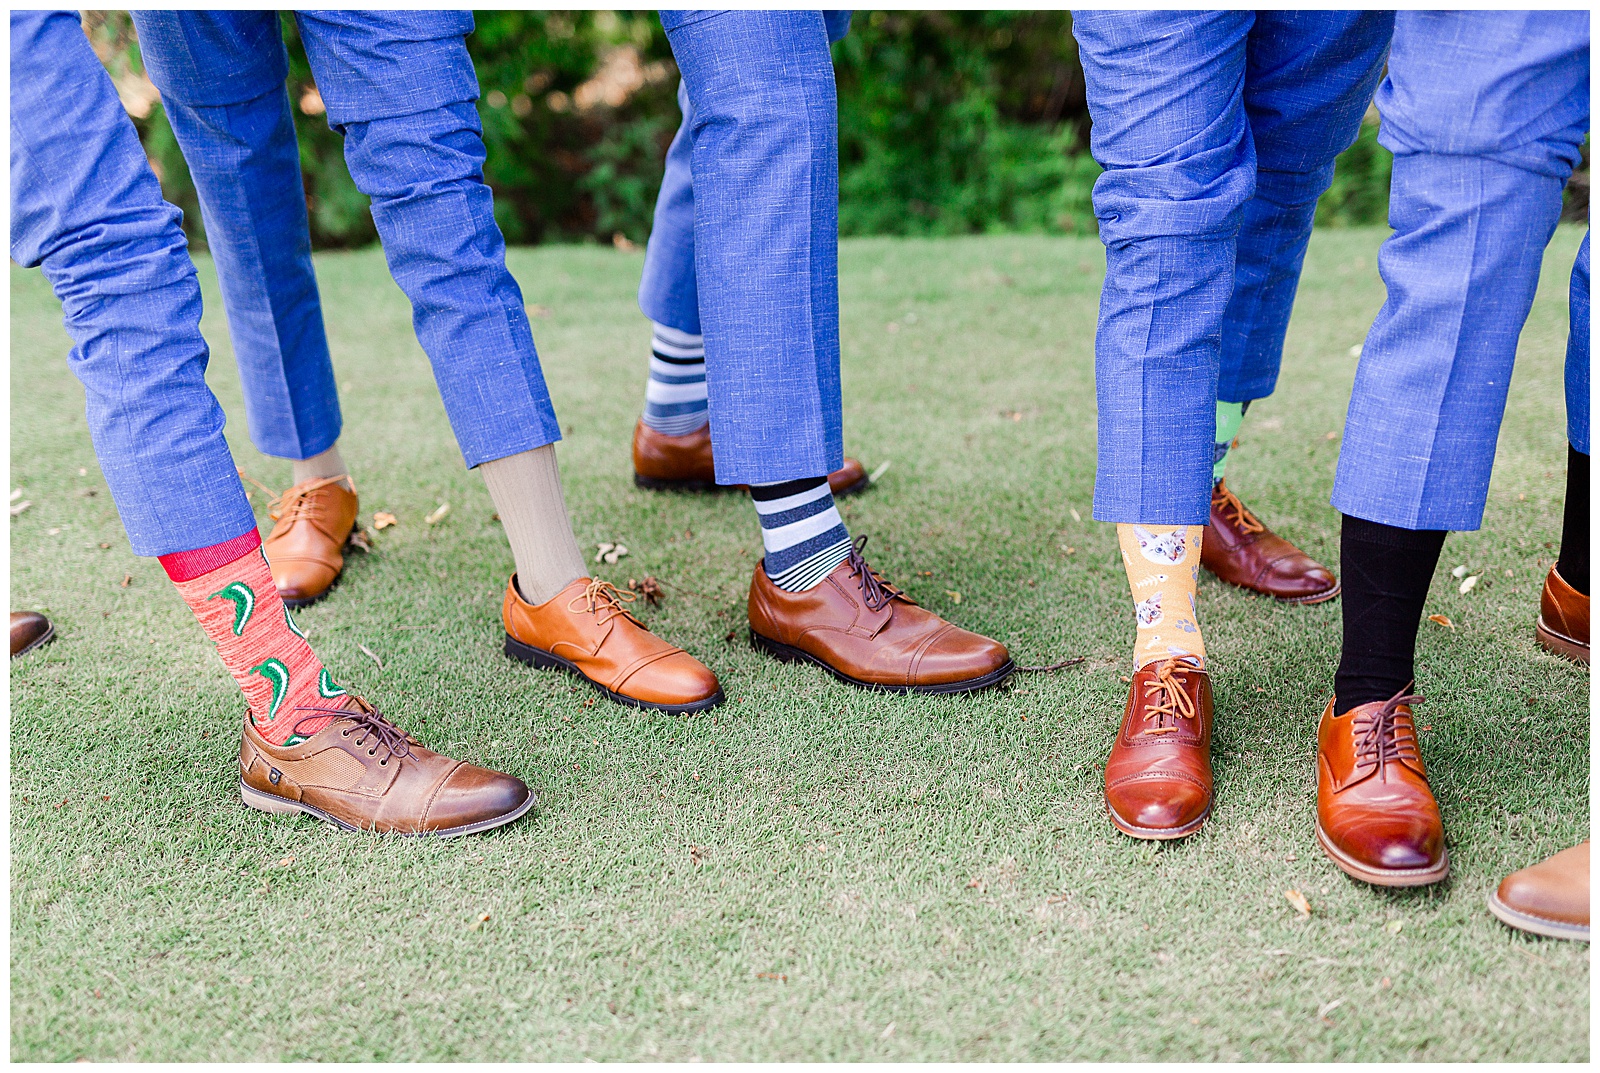 Blue Themed Suit and funny mismatched socks from Groom Portraits at Outdoorsy Summer Wedding at North Carolina Lakehouse in the Mountains | check out the full wedding at KevynDixonPhoto.com